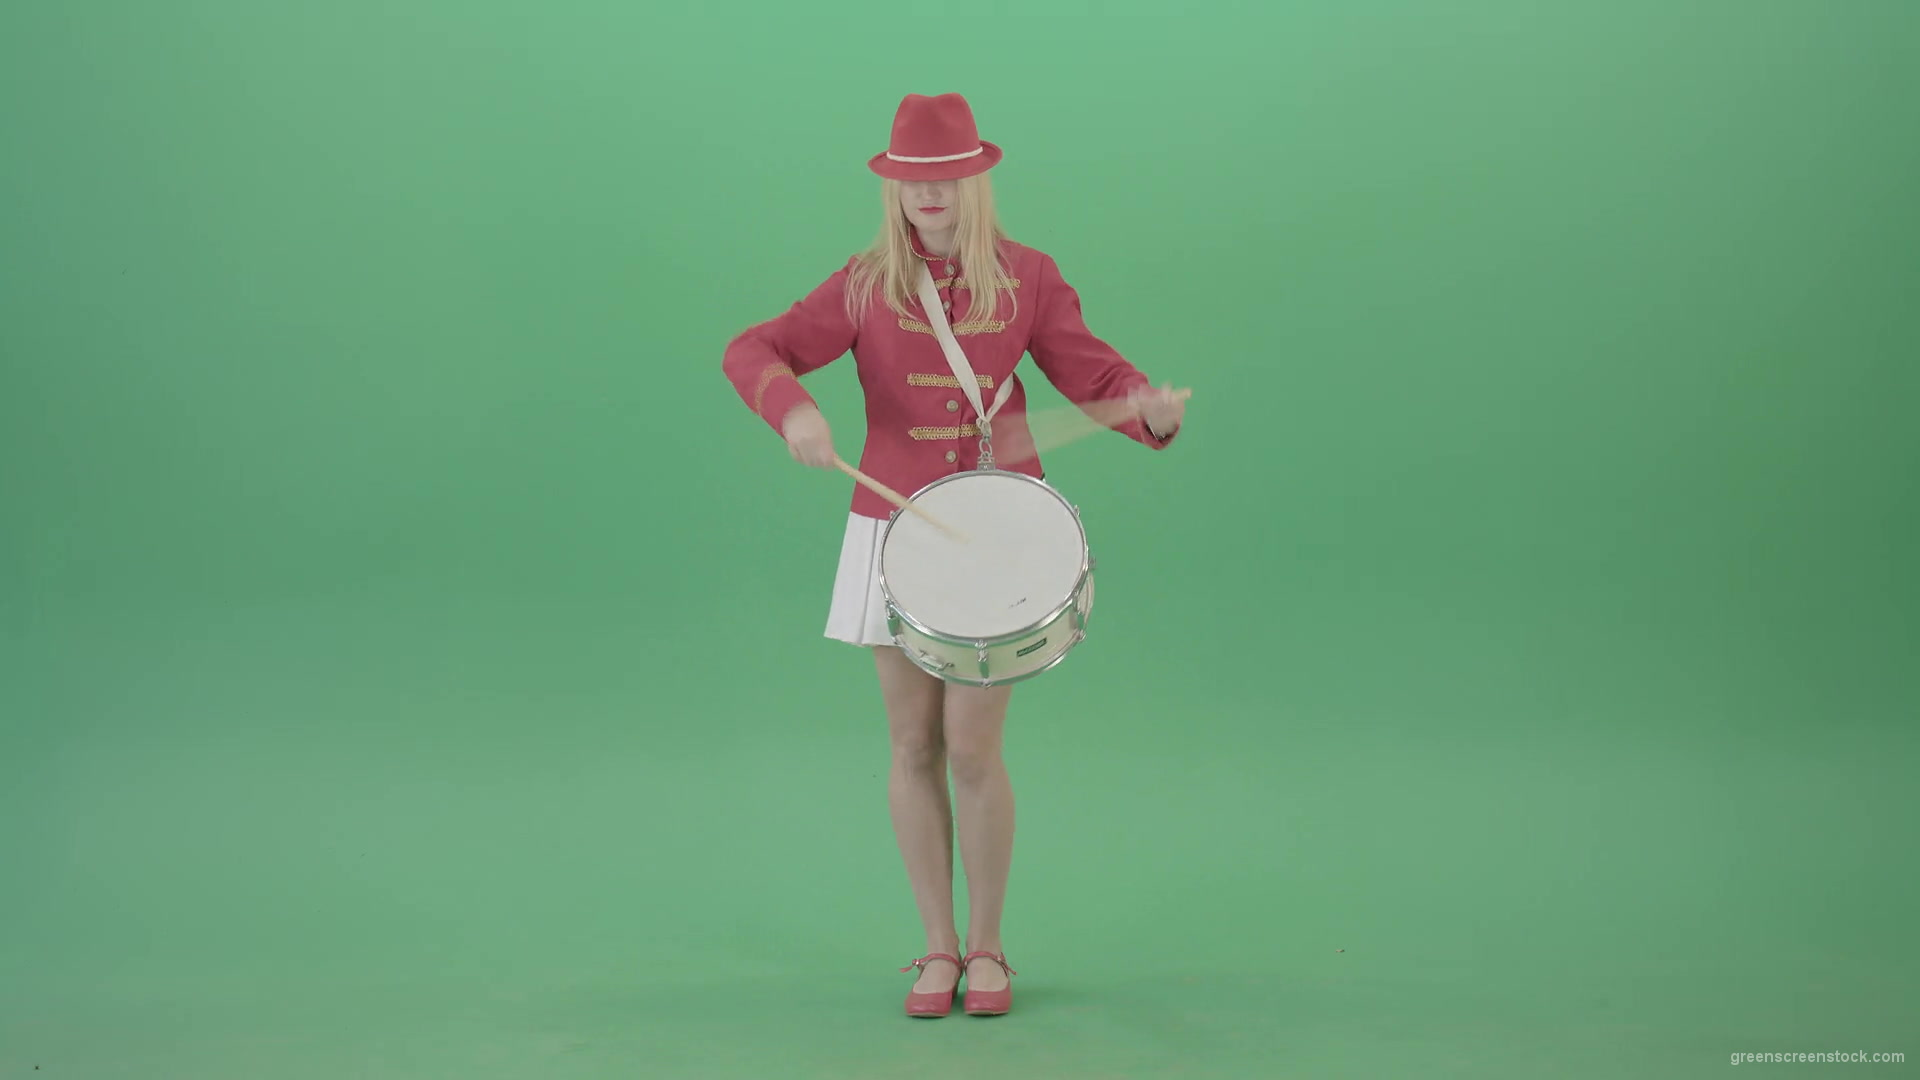 Girl-in-red-dress-marching-and-playing-drum-snare-music-instrument-over-green-screen-4K-Video-Footage-1920_004 Green Screen Stock